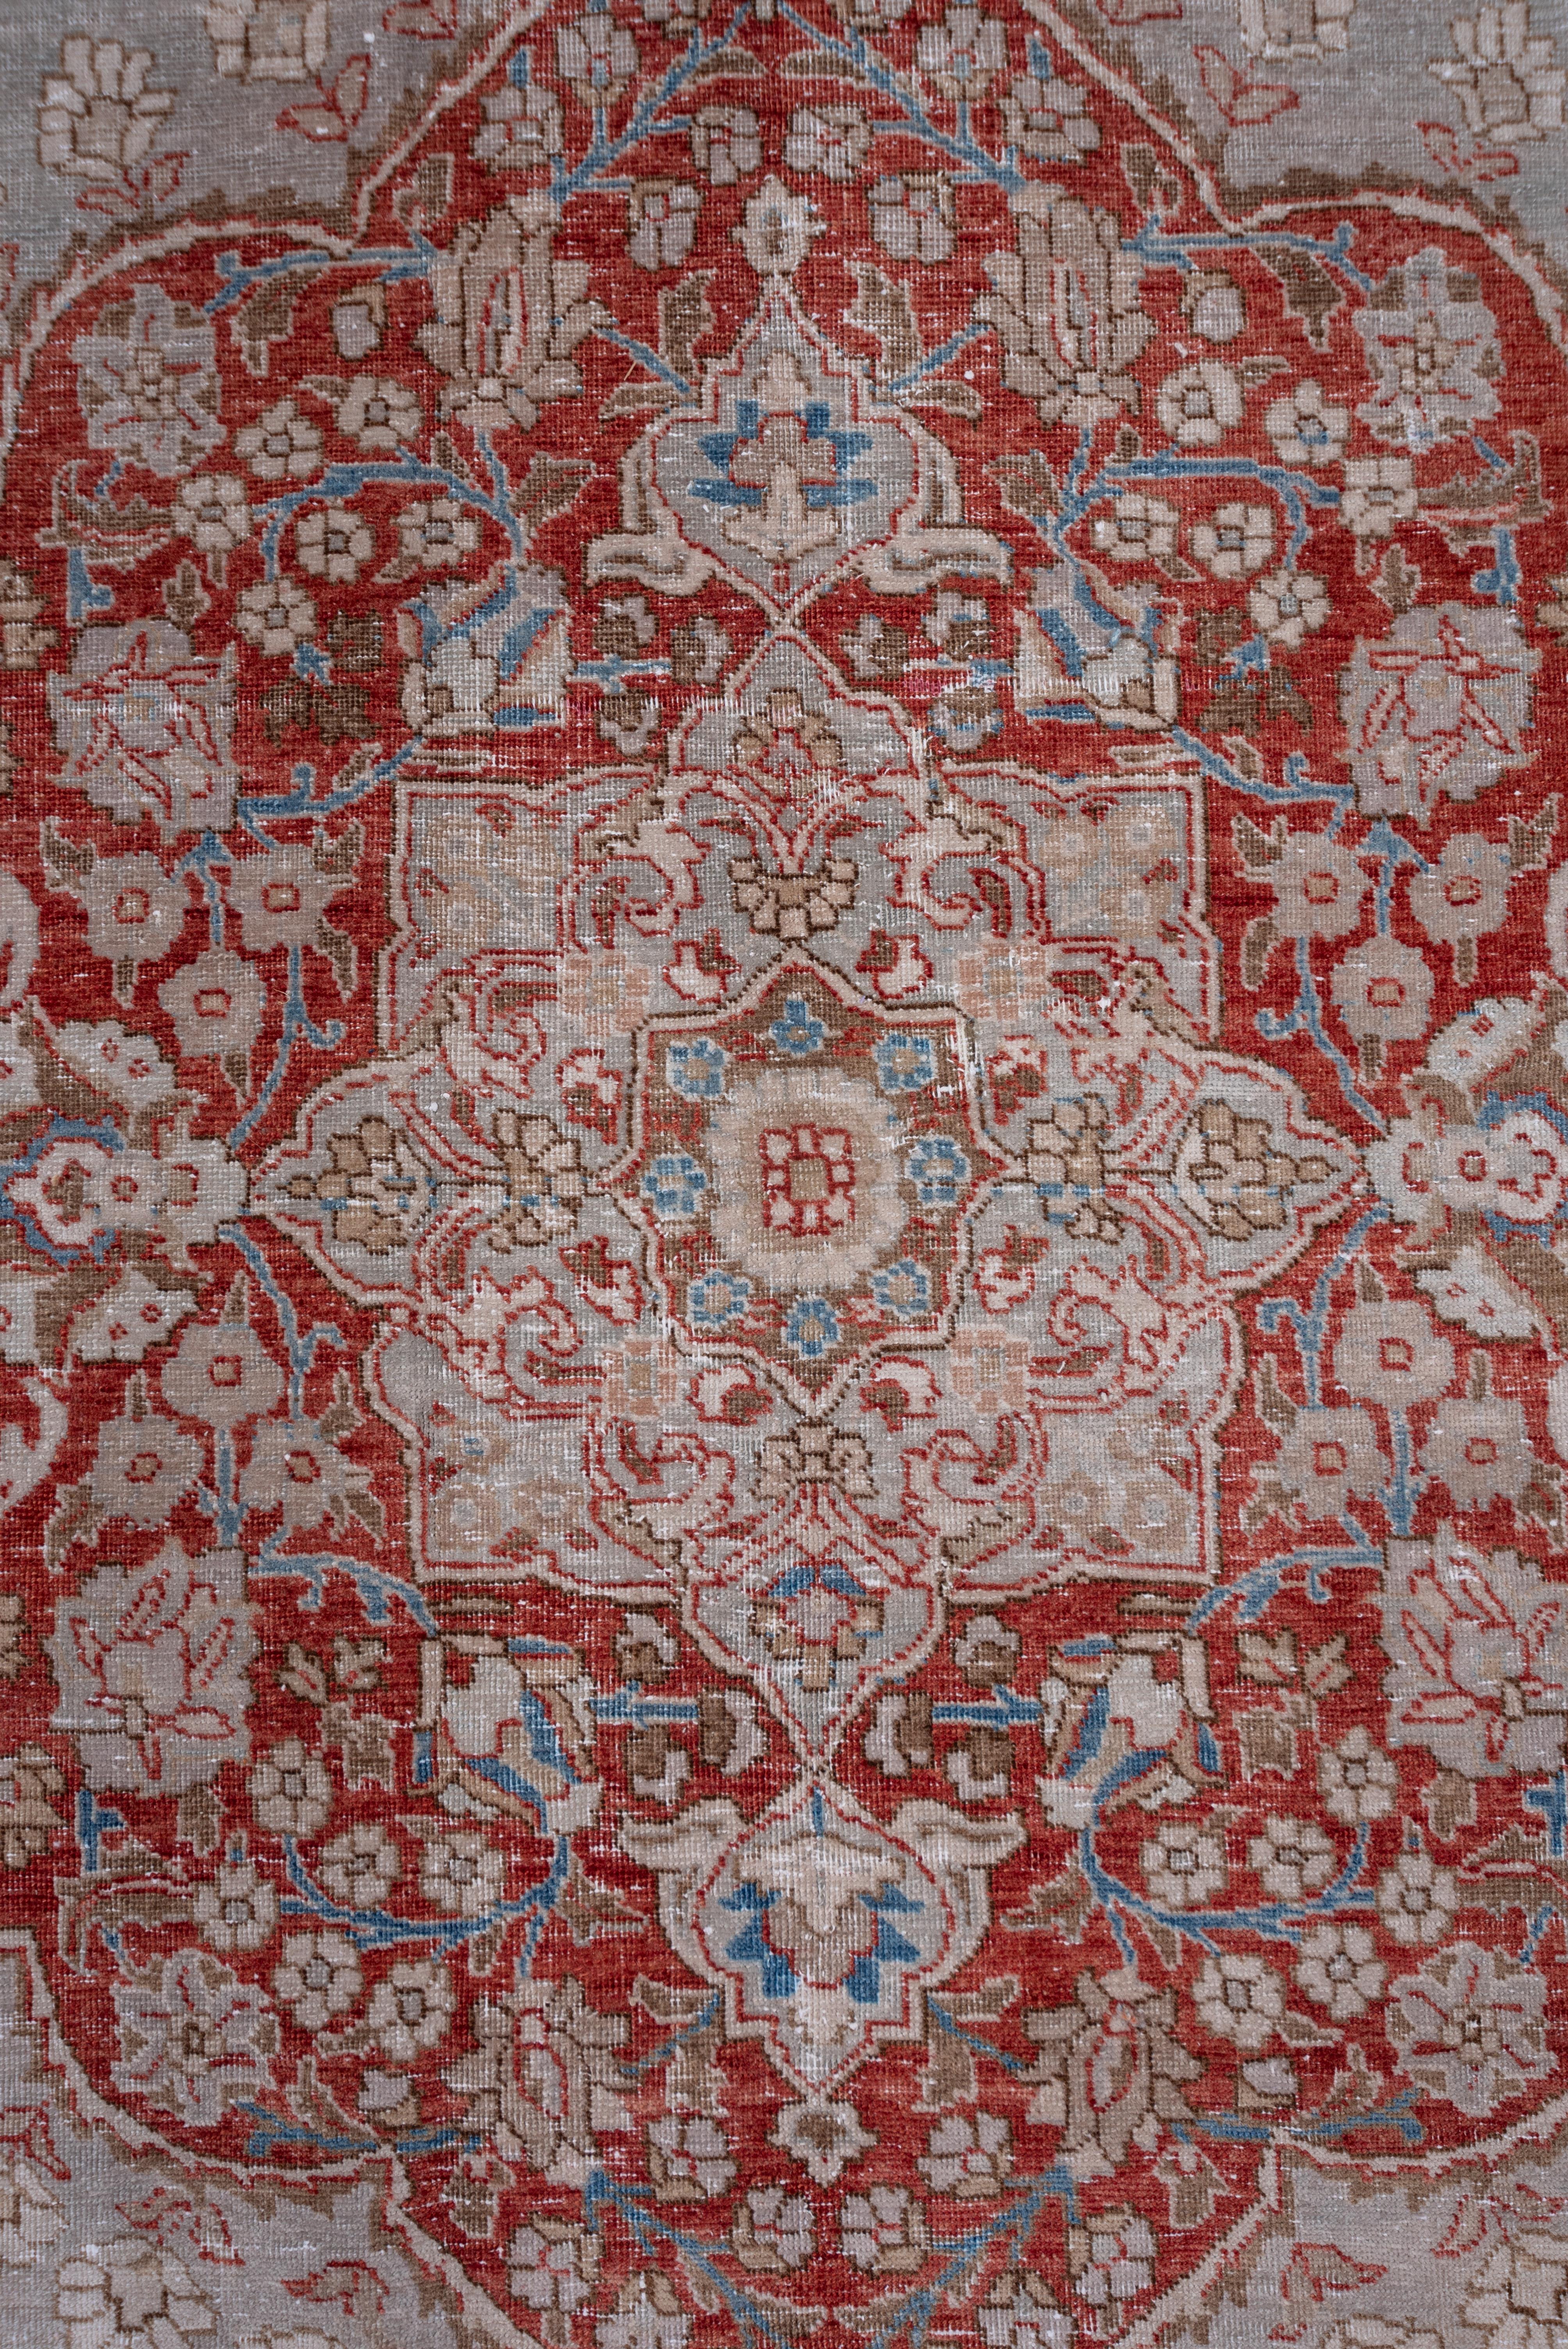 Hand-Knotted Eliko Rug by David Ariel Persian Tabriz Rug, Grey Subfield and Red Borders For Sale